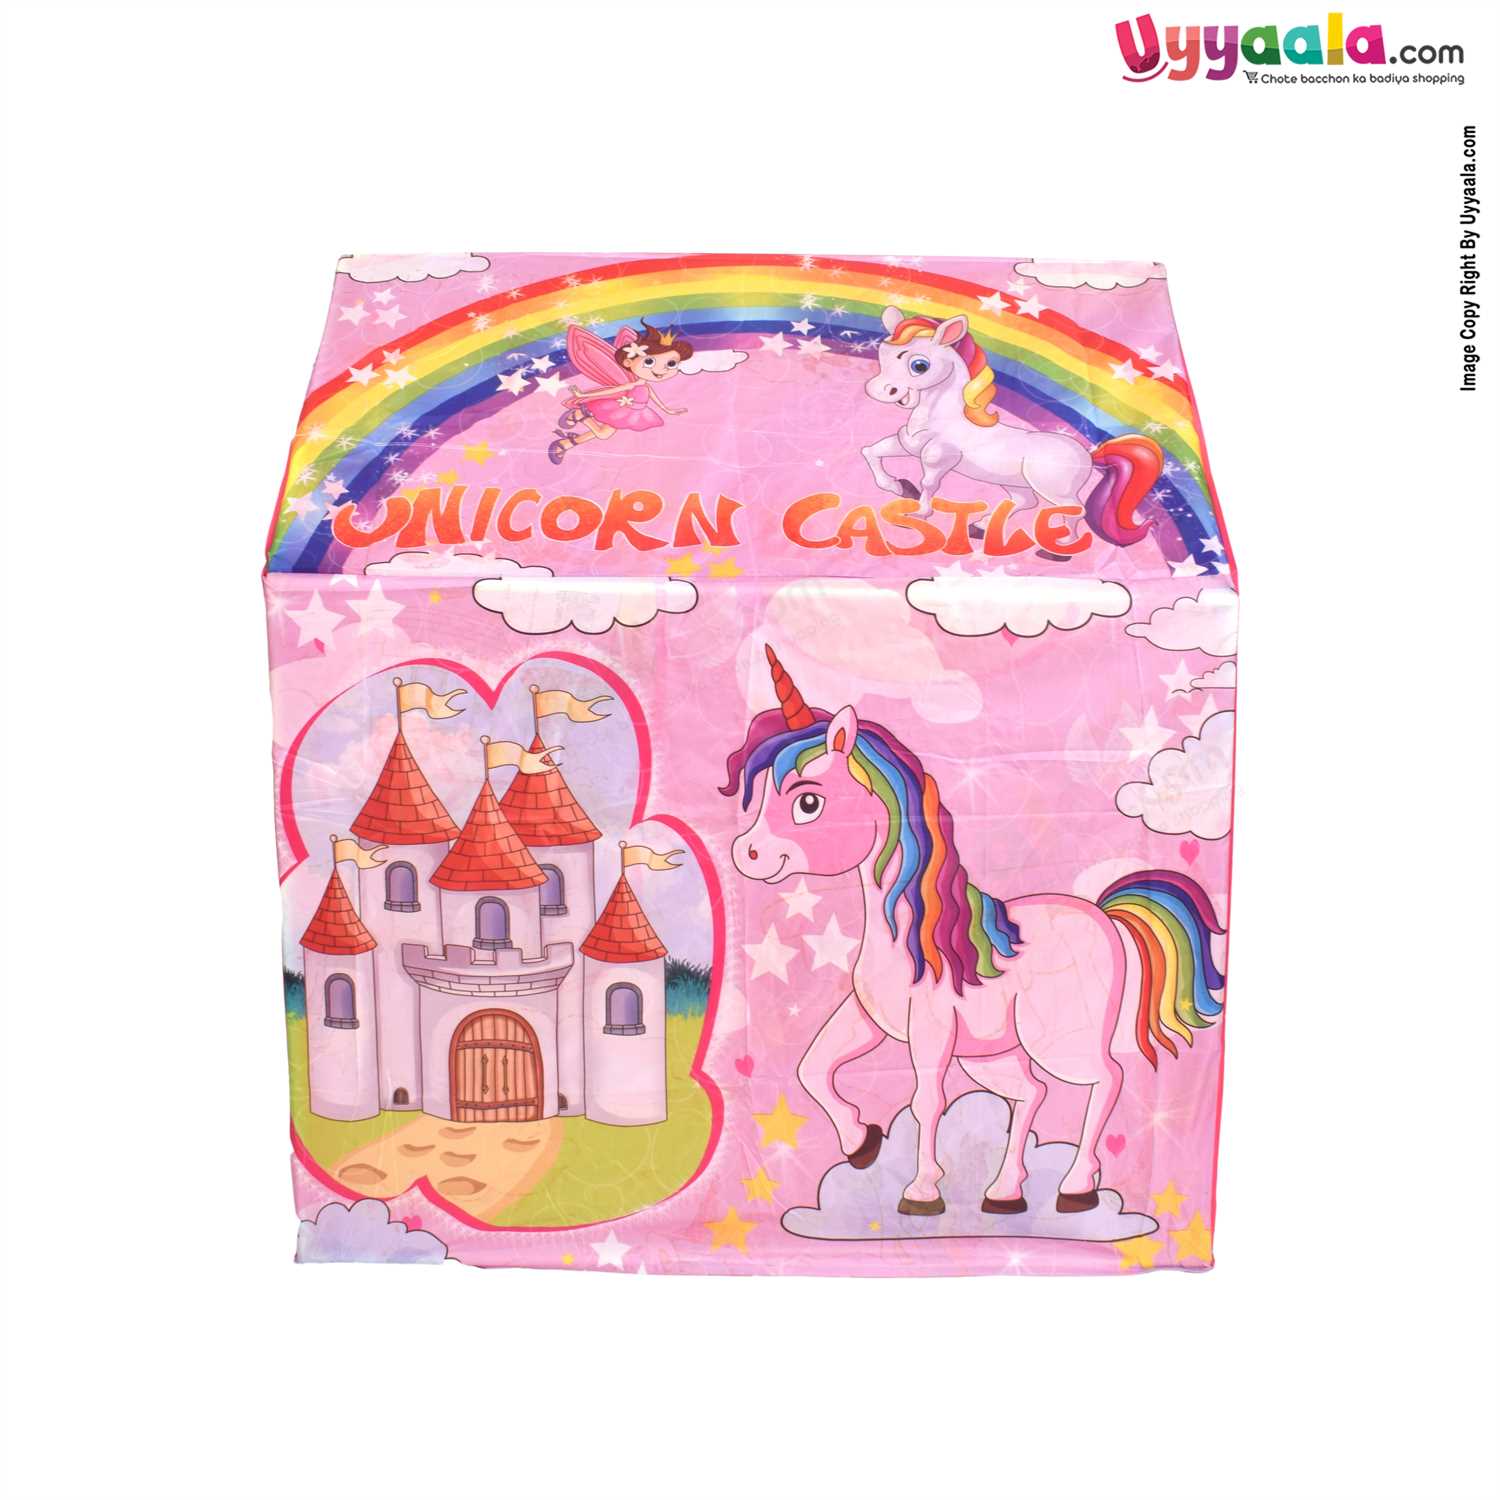 Kids play tent house with unicorn castle theme